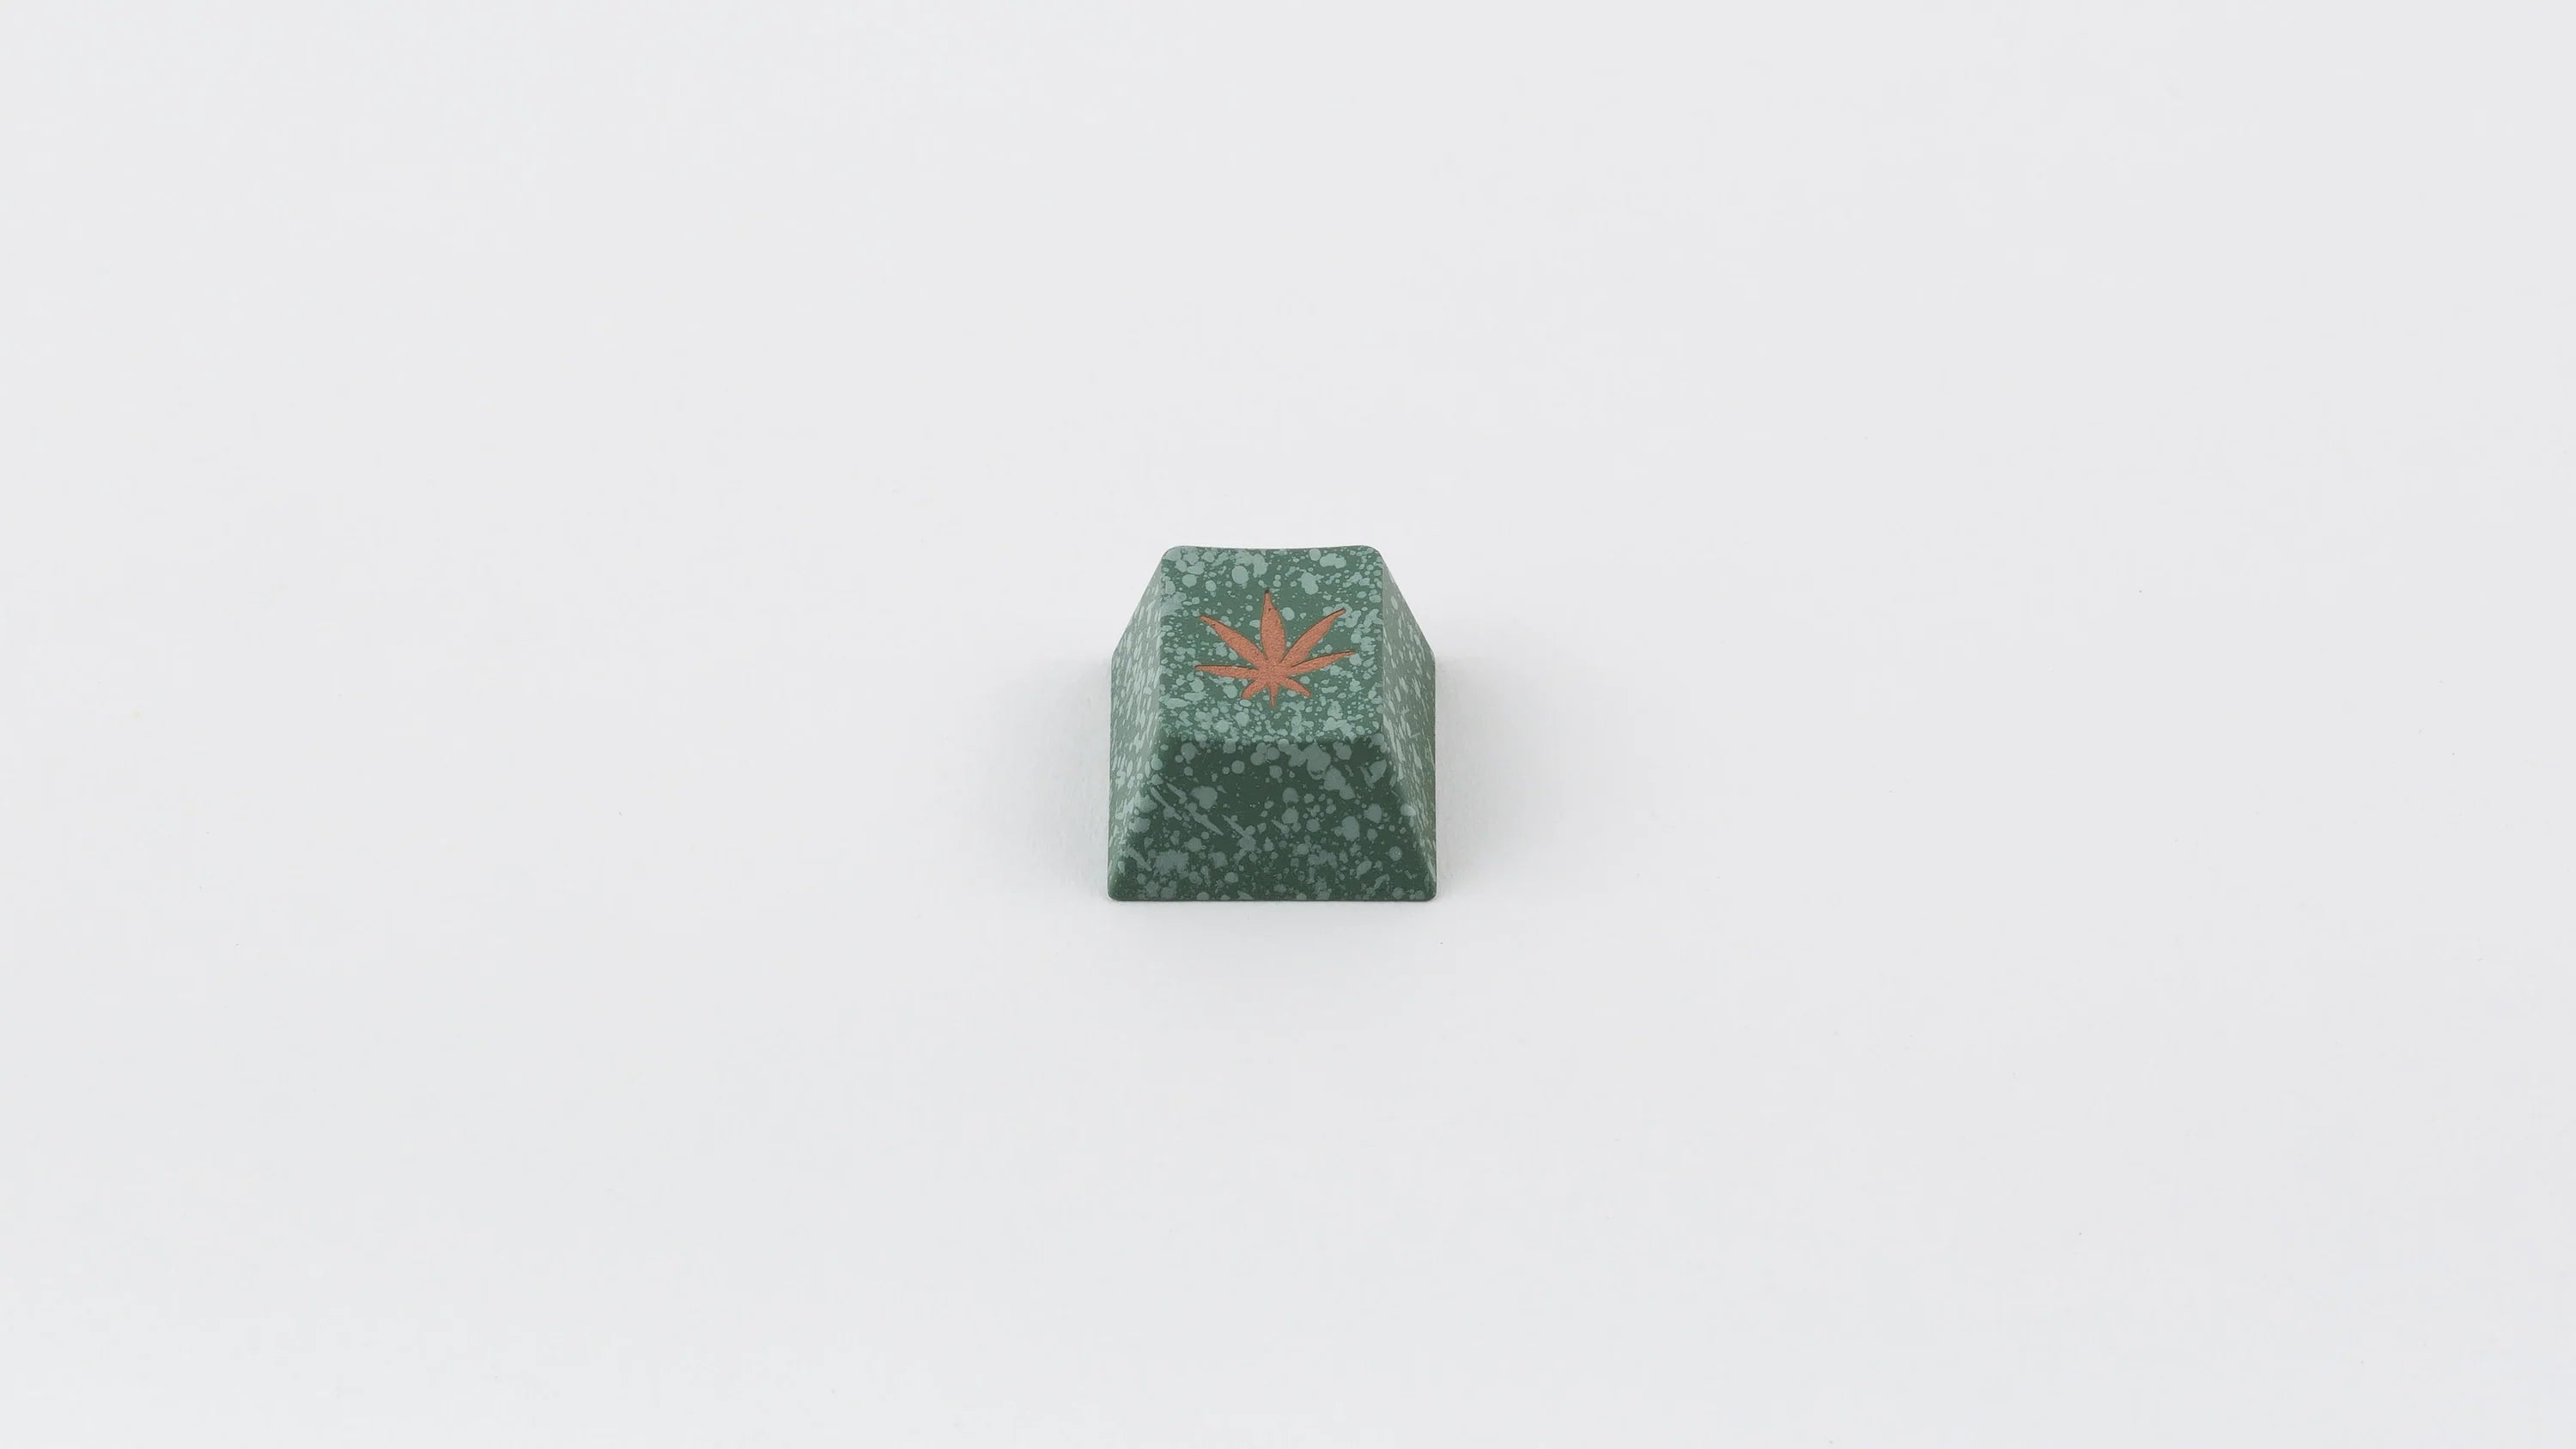 [In Stock] Zooted x Metal Artisan Keycap